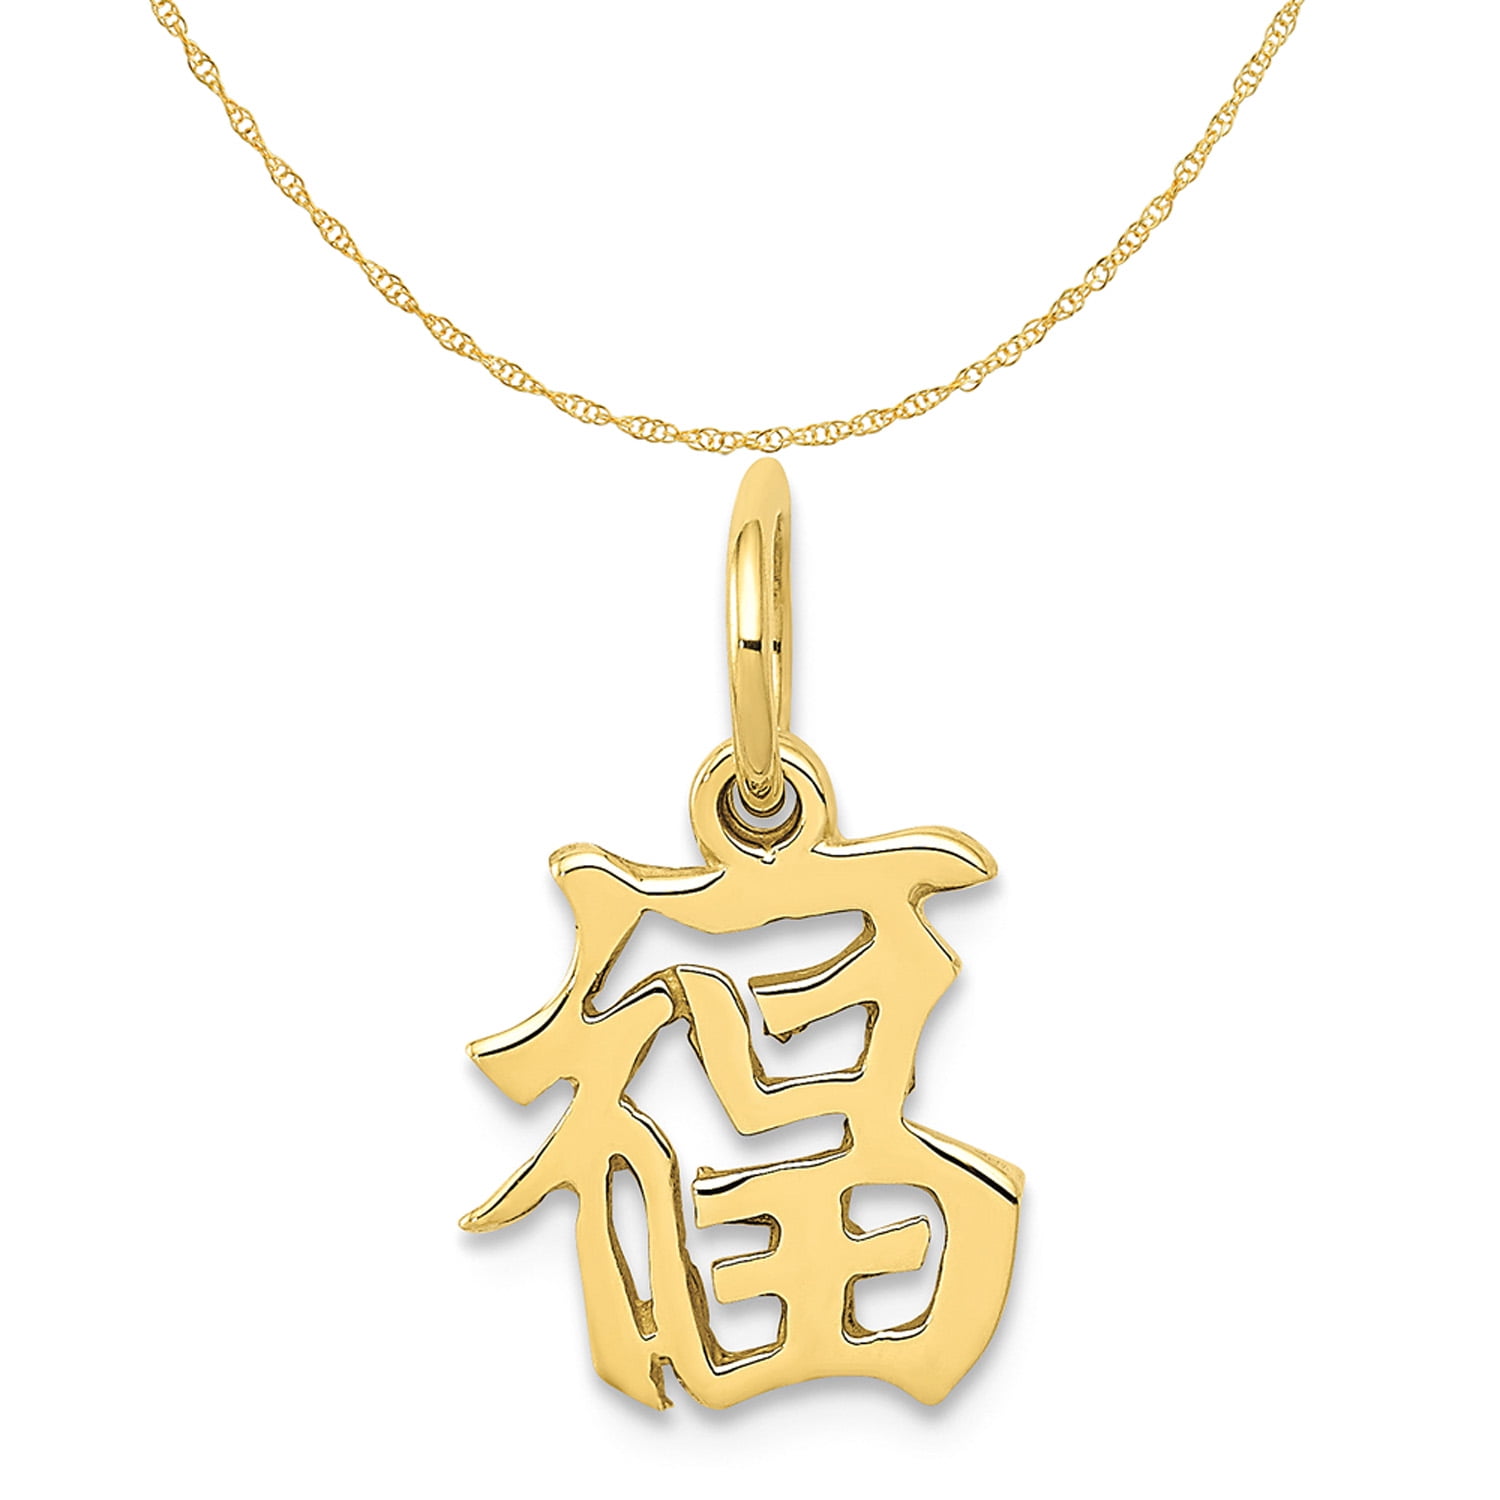 Chinese Necklace For Men | Yin Yang Paradise